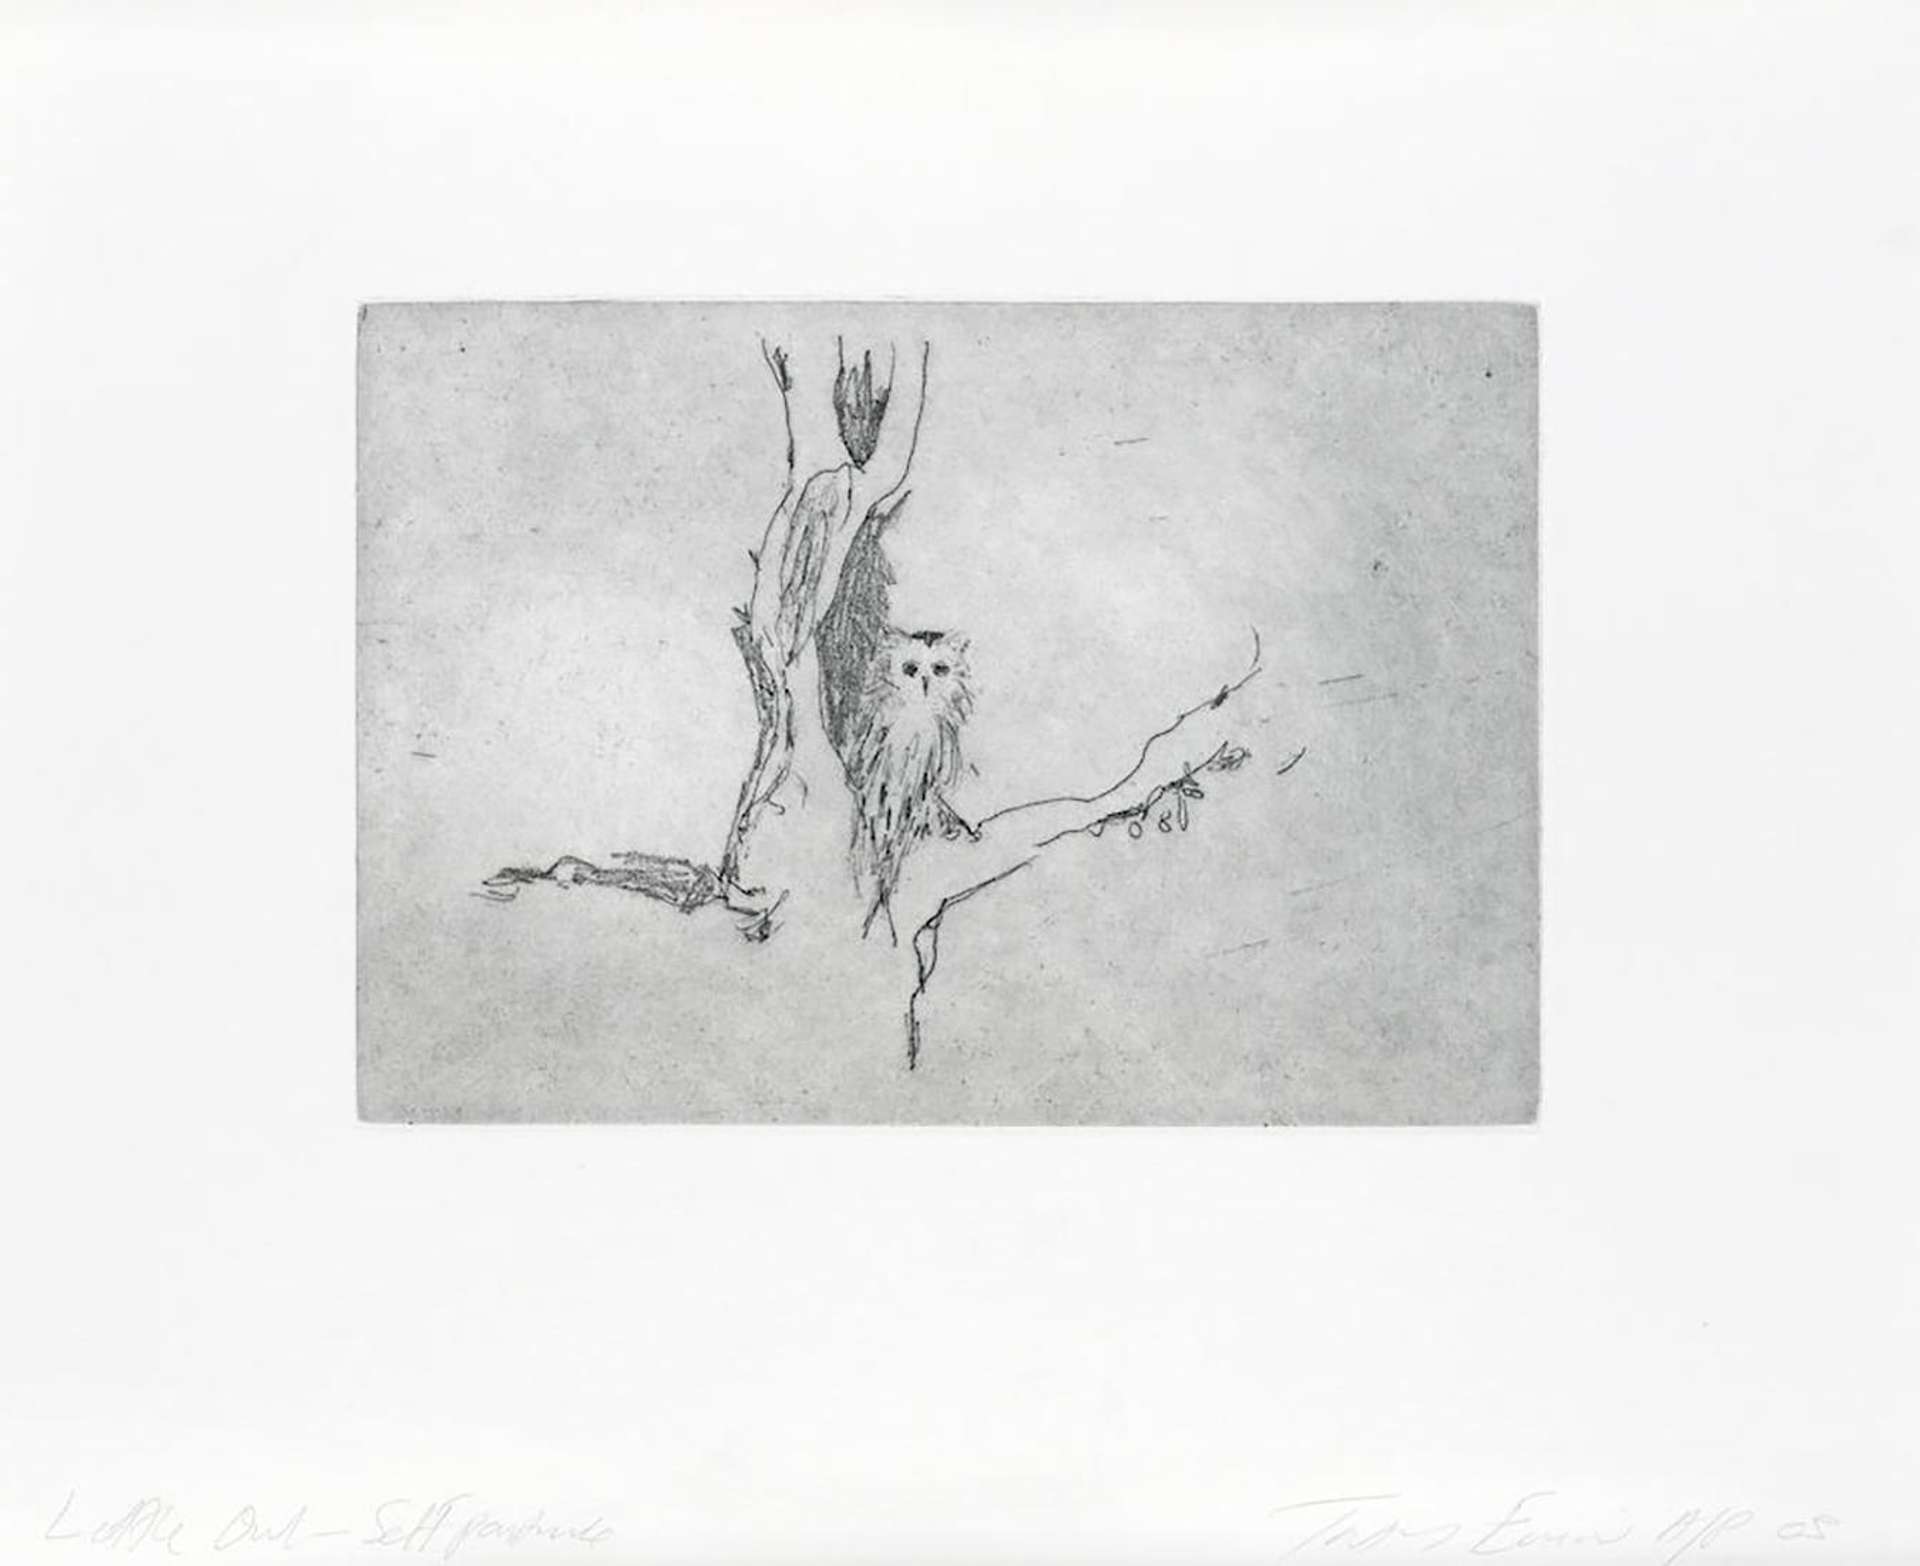 Tracey Emin: Little Owl - Signed Print